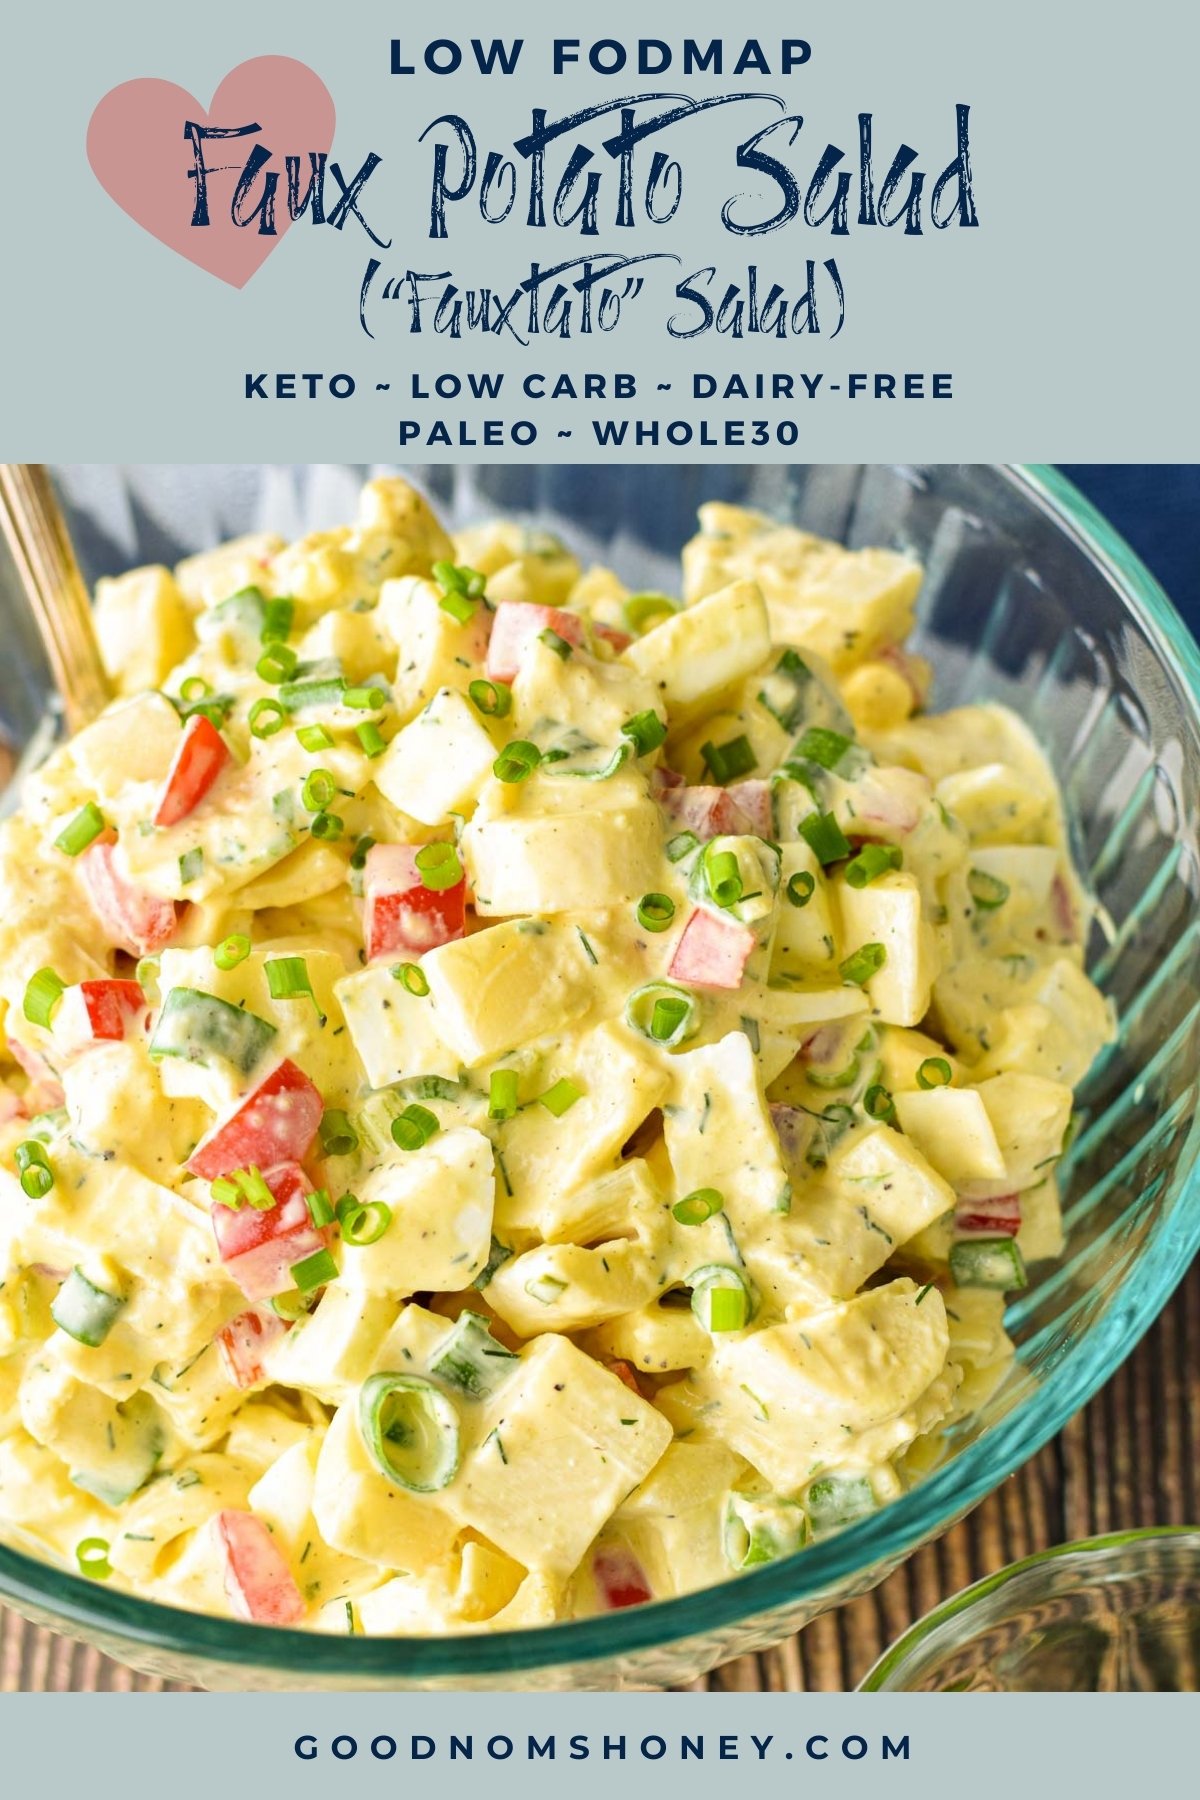 pinterest image with low fodmap faux potato salad fauxtato salad keto low carb dairy-free paleo whole30 at the top and goodnomshoney.com at the bottom